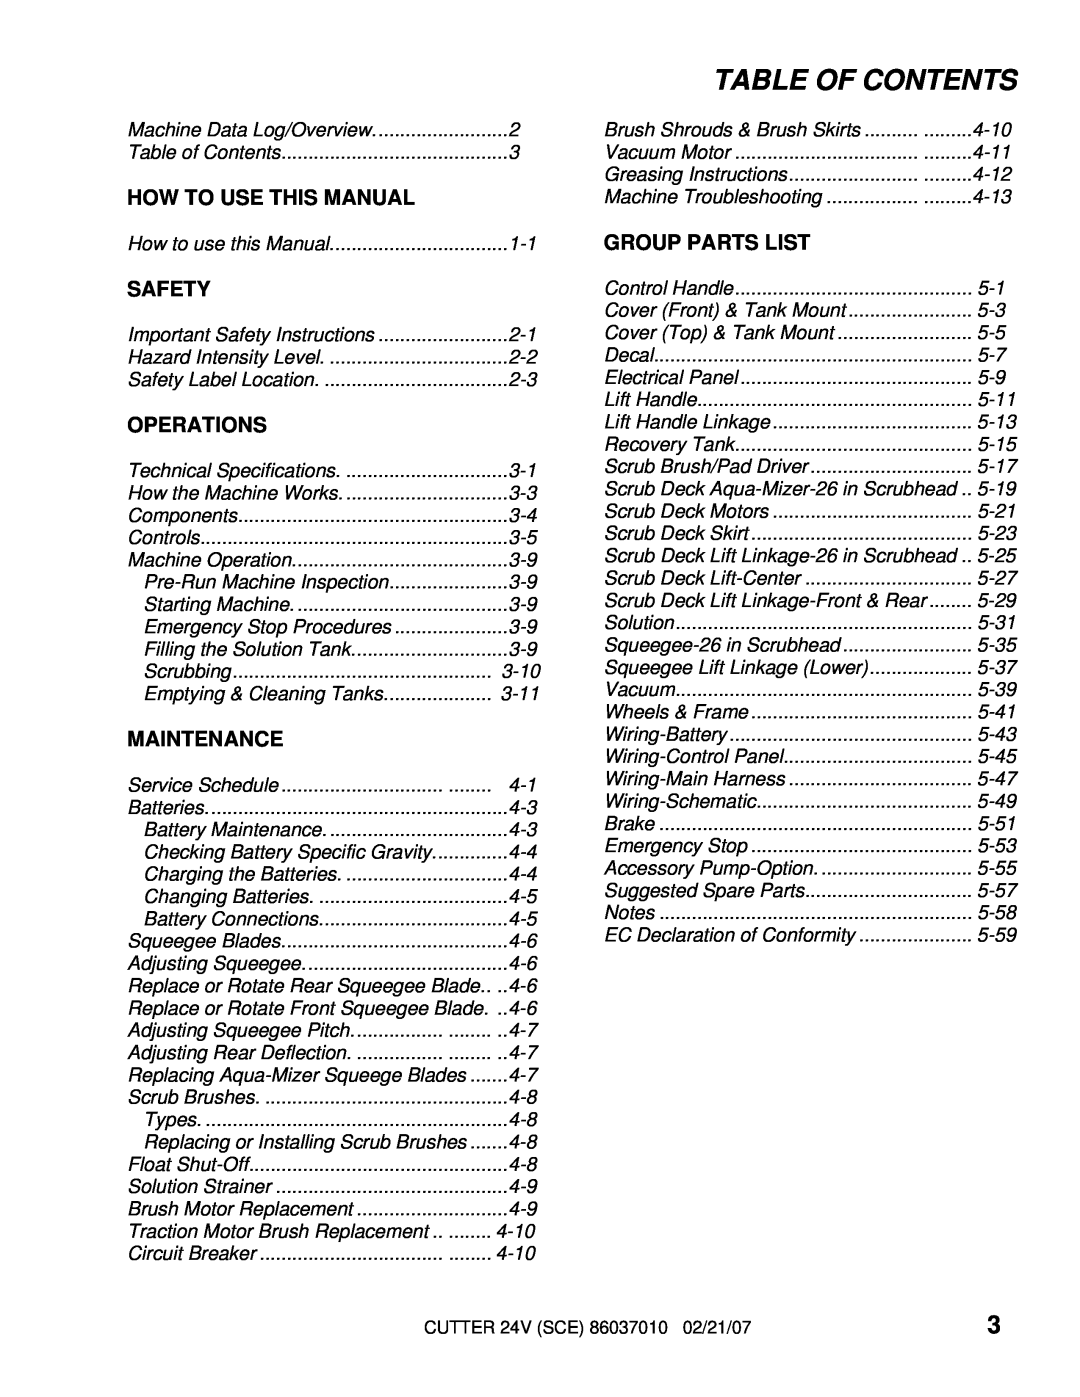 Windsor 10052270, SCE264 Table Of Contents, How To Use This Manual, Safety, Operations, Maintenance, Group Parts List 